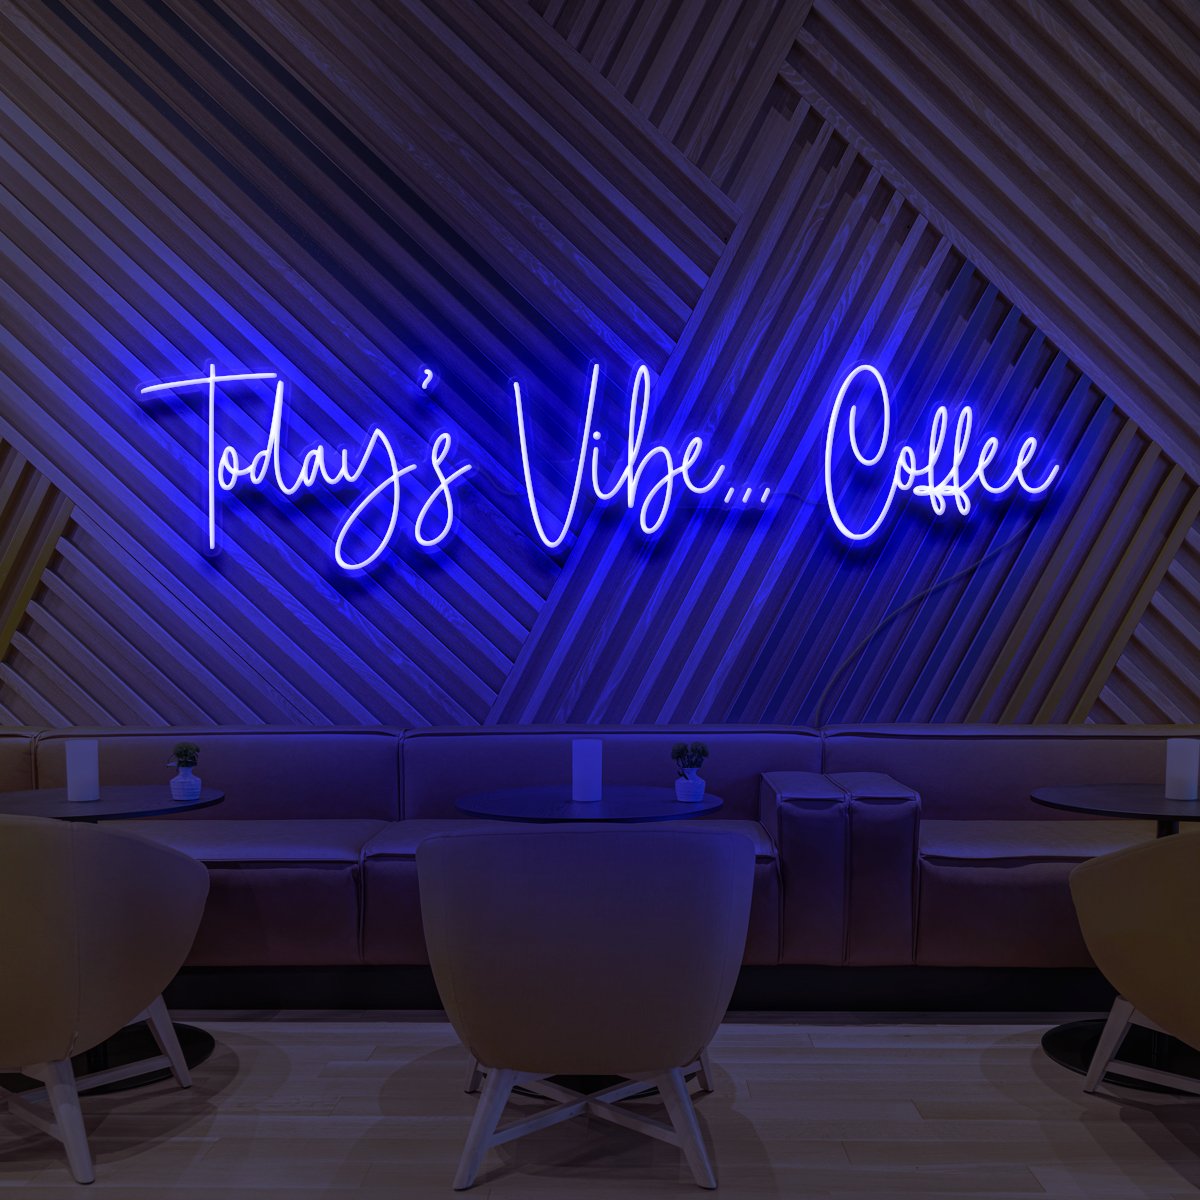 "Today's Vibe... Coffee" Neon Sign for Cafés 90cm (3ft) / Blue / LED Neon by Neon Icons